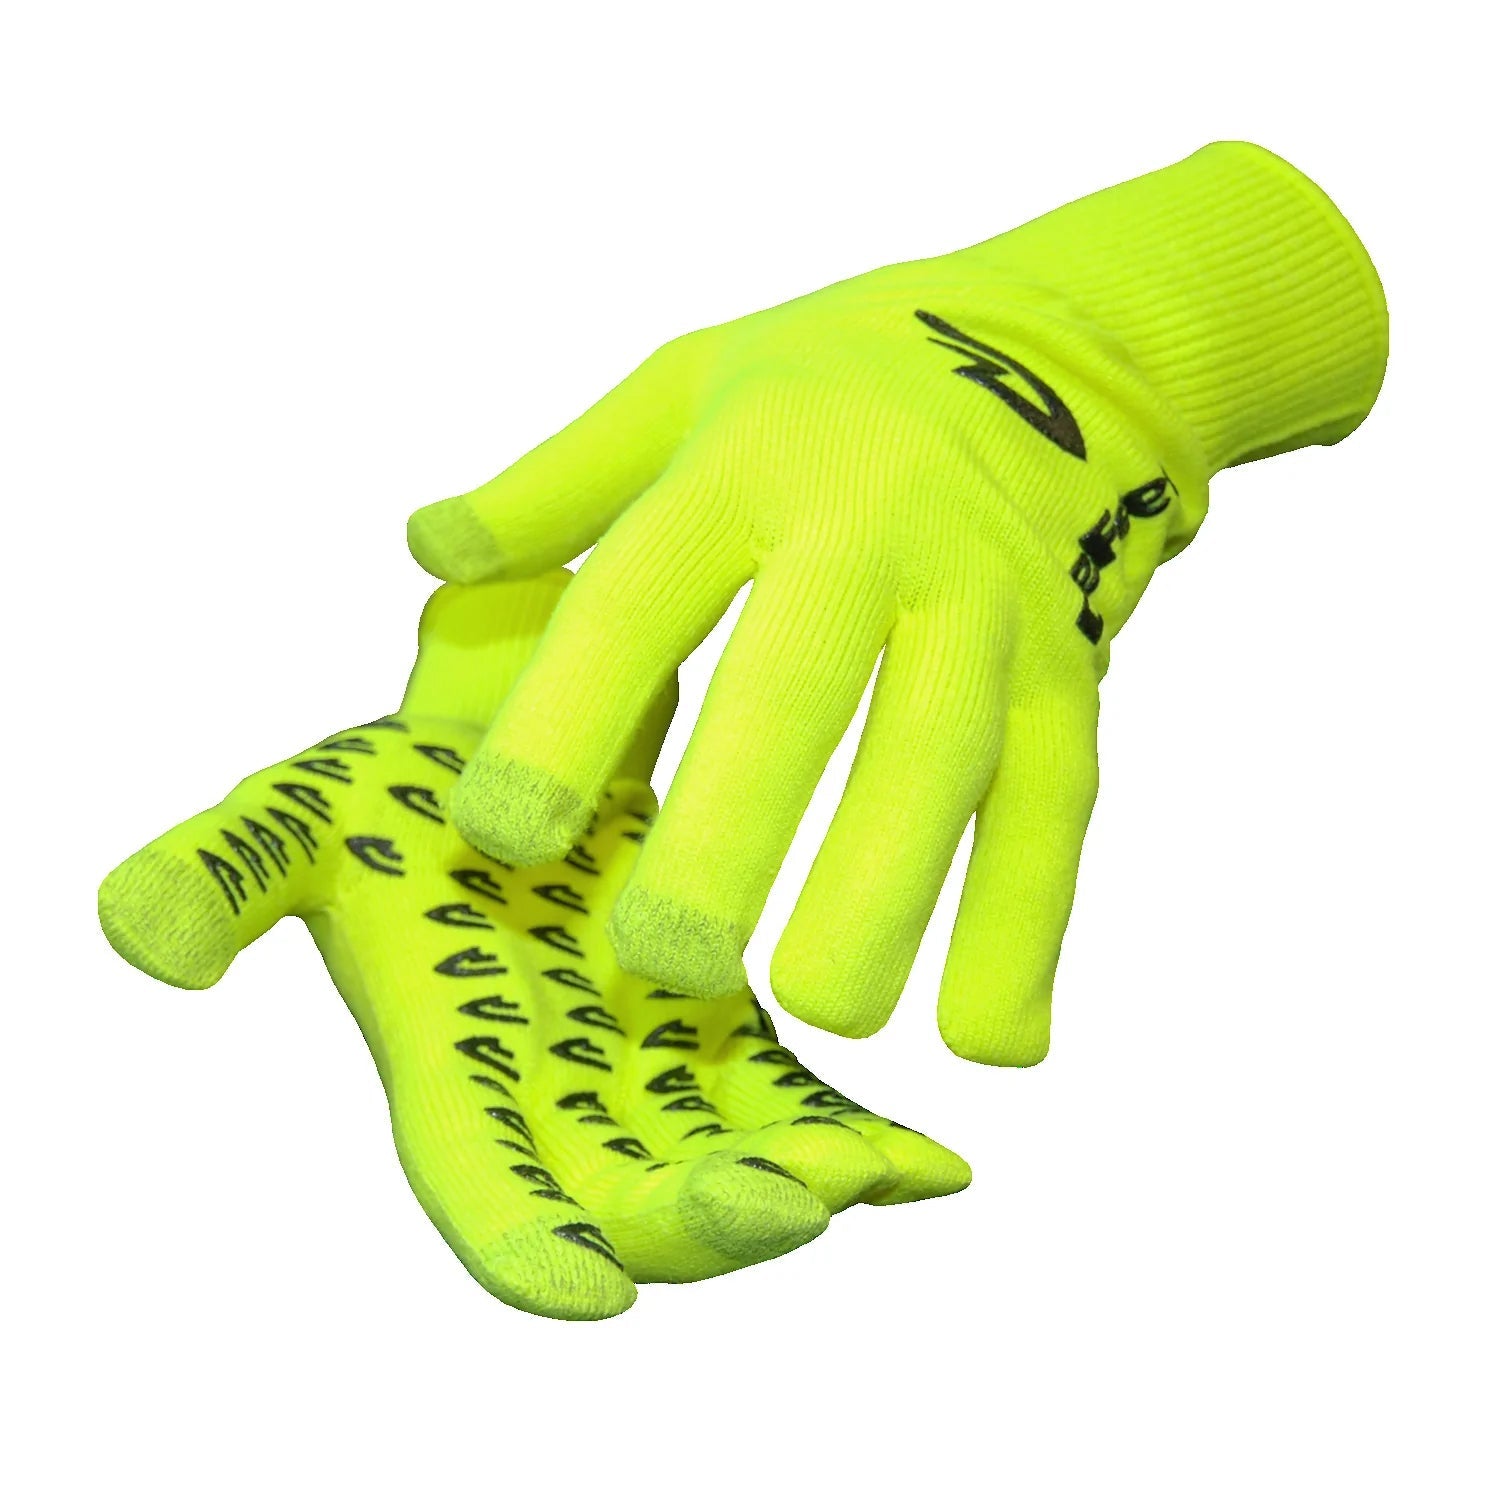 yellow knitted cycling gloves with black D-logo grippies on palm